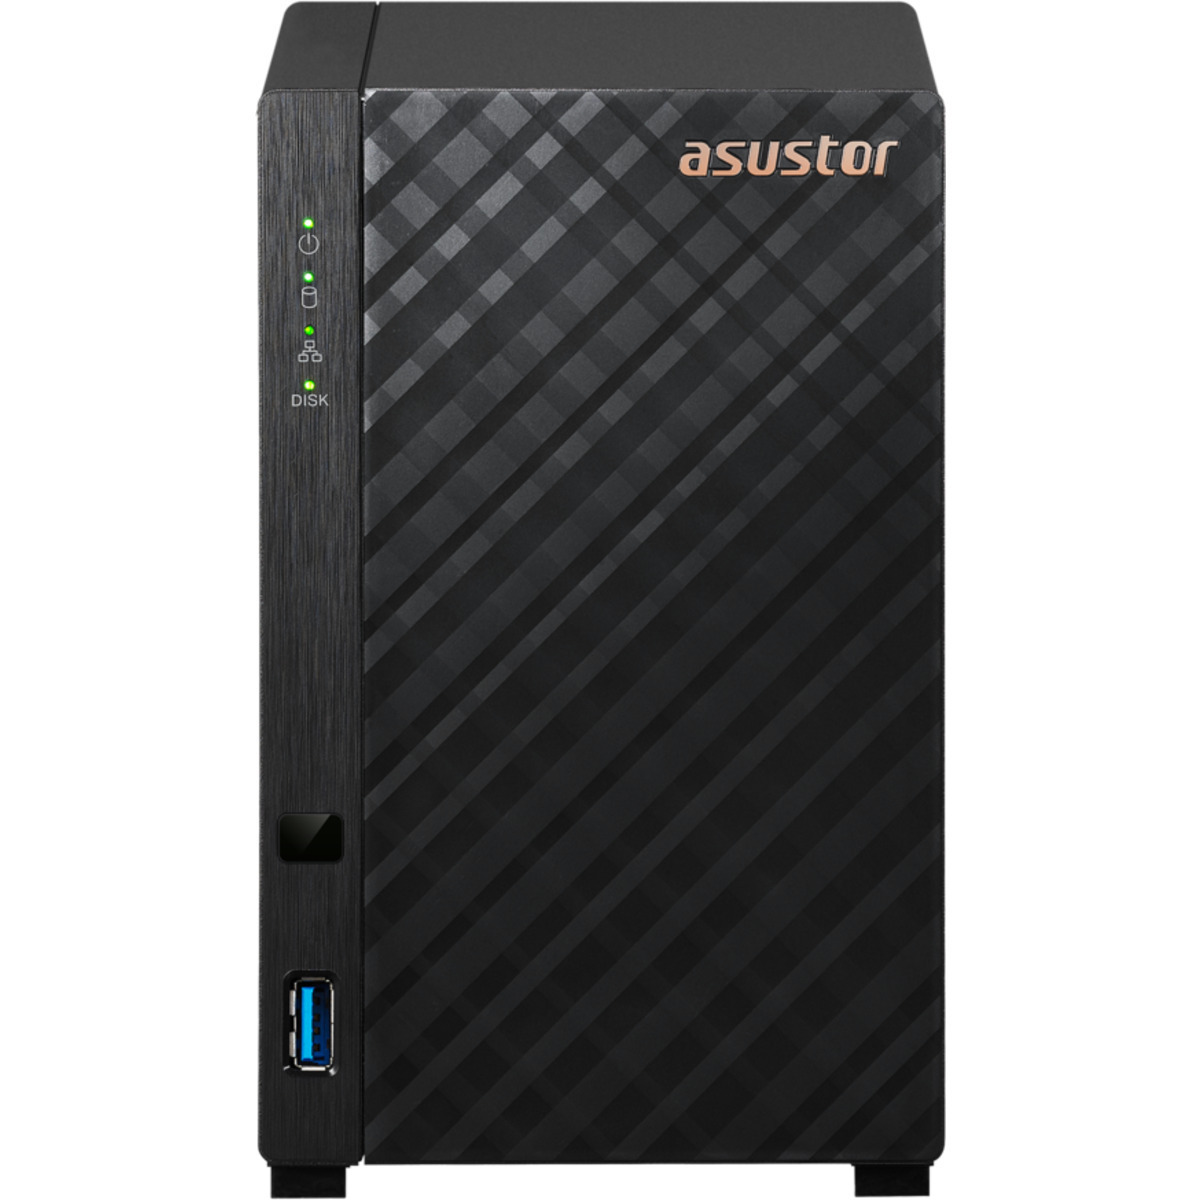 ASUSTOR DRIVESTOR 2 Lite AS1102TL 6tb 2-Bay Desktop Personal / Basic Home / Small Office NAS - Network Attached Storage Device 1x6tb Western Digital Red Plus WD60EFPX 3.5 5640rpm SATA 6Gb/s HDD NAS Class Drives Installed - Burn-In Tested DRIVESTOR 2 Lite AS1102TL